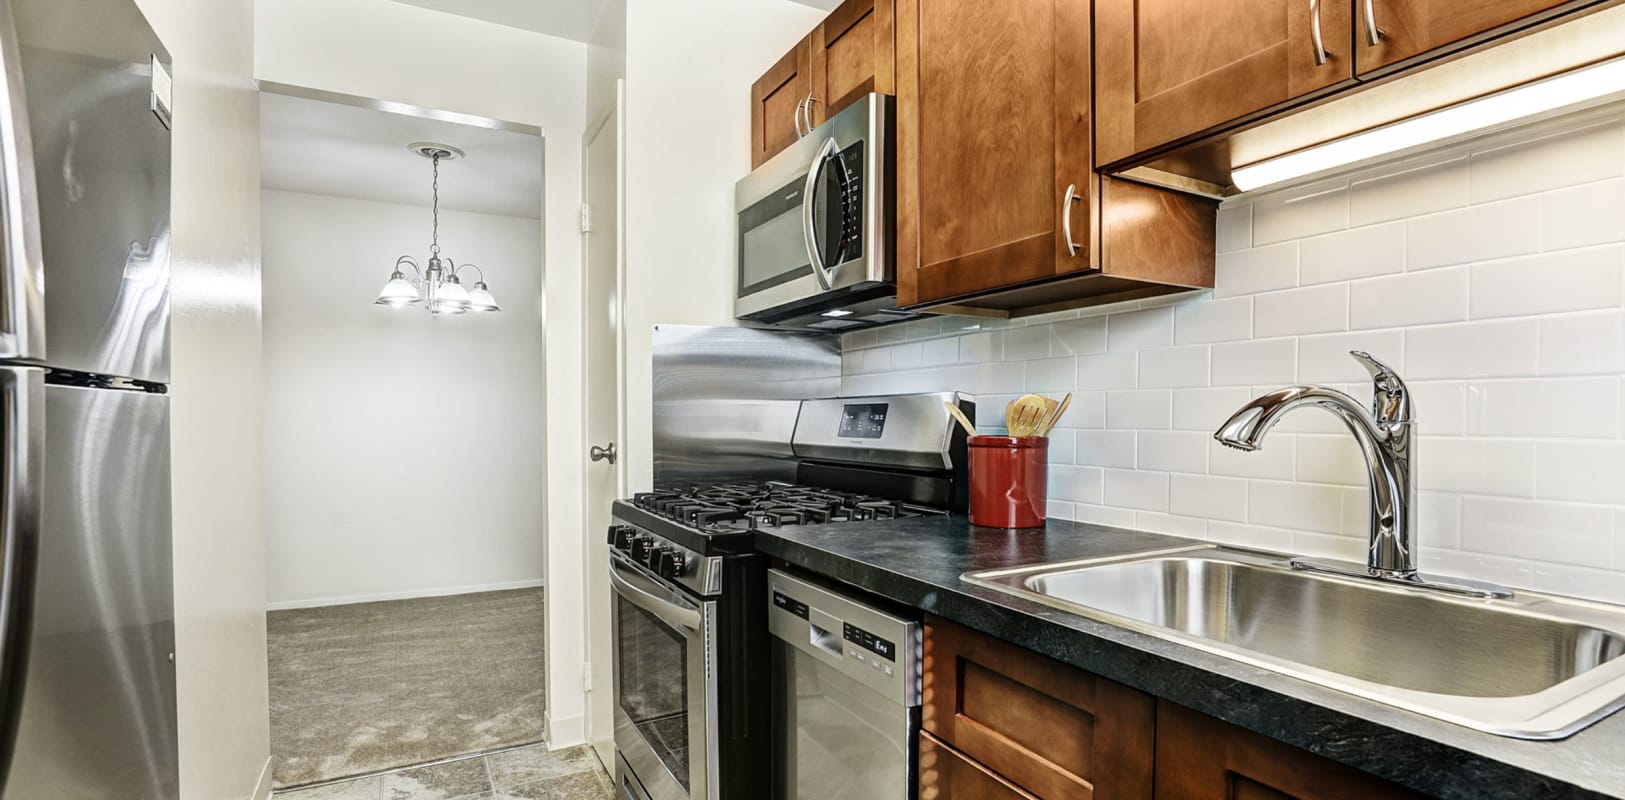 Fully equipped kitchen at Lehigh Plaza Apartments in Bethlehem, Pennsylvania